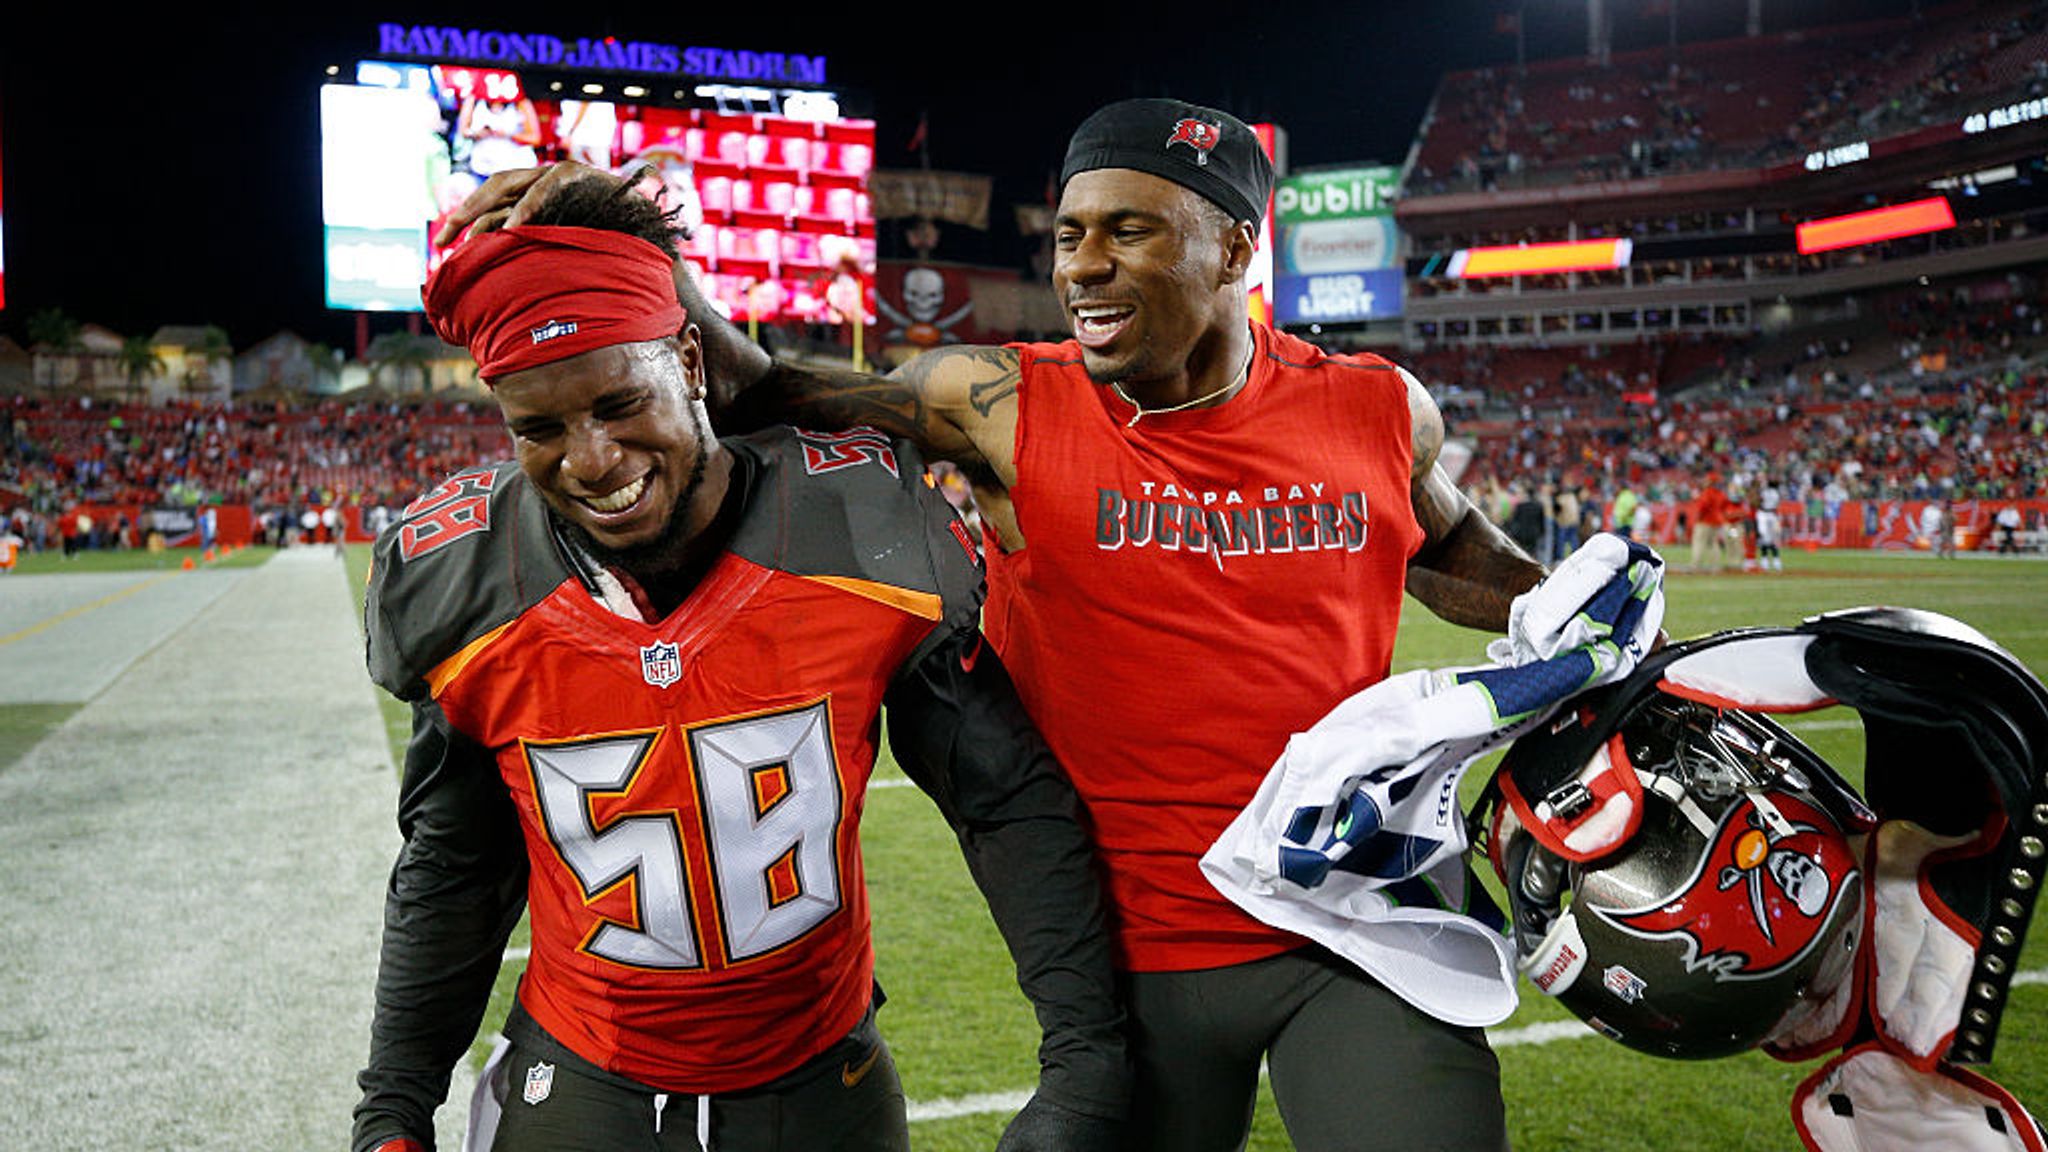 49ers-Bucs: Kwon Alexander ejected from game after illegal hit on